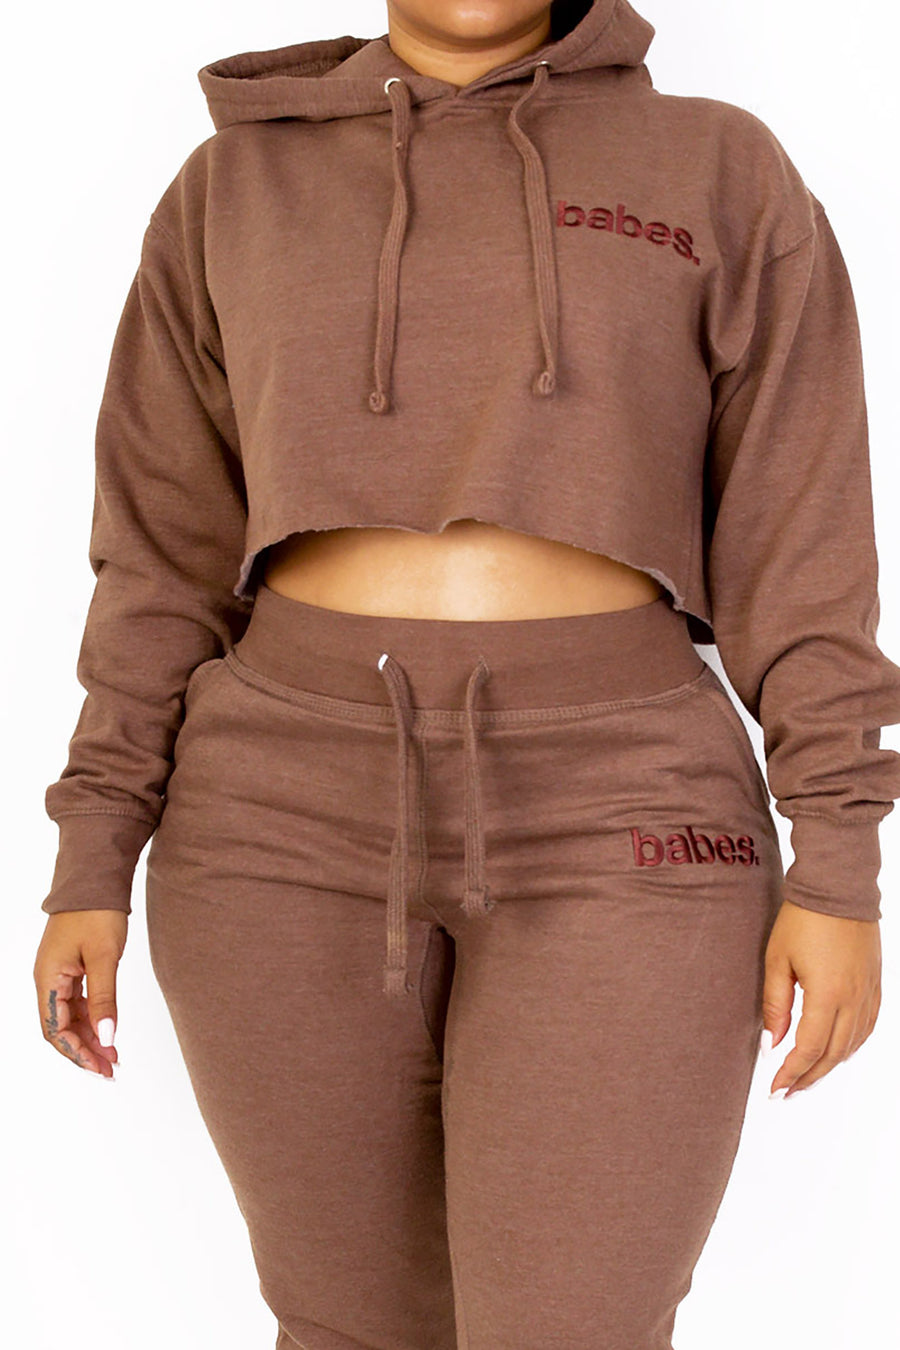 Babes Comfy Hoodie "Cropped Mocha"